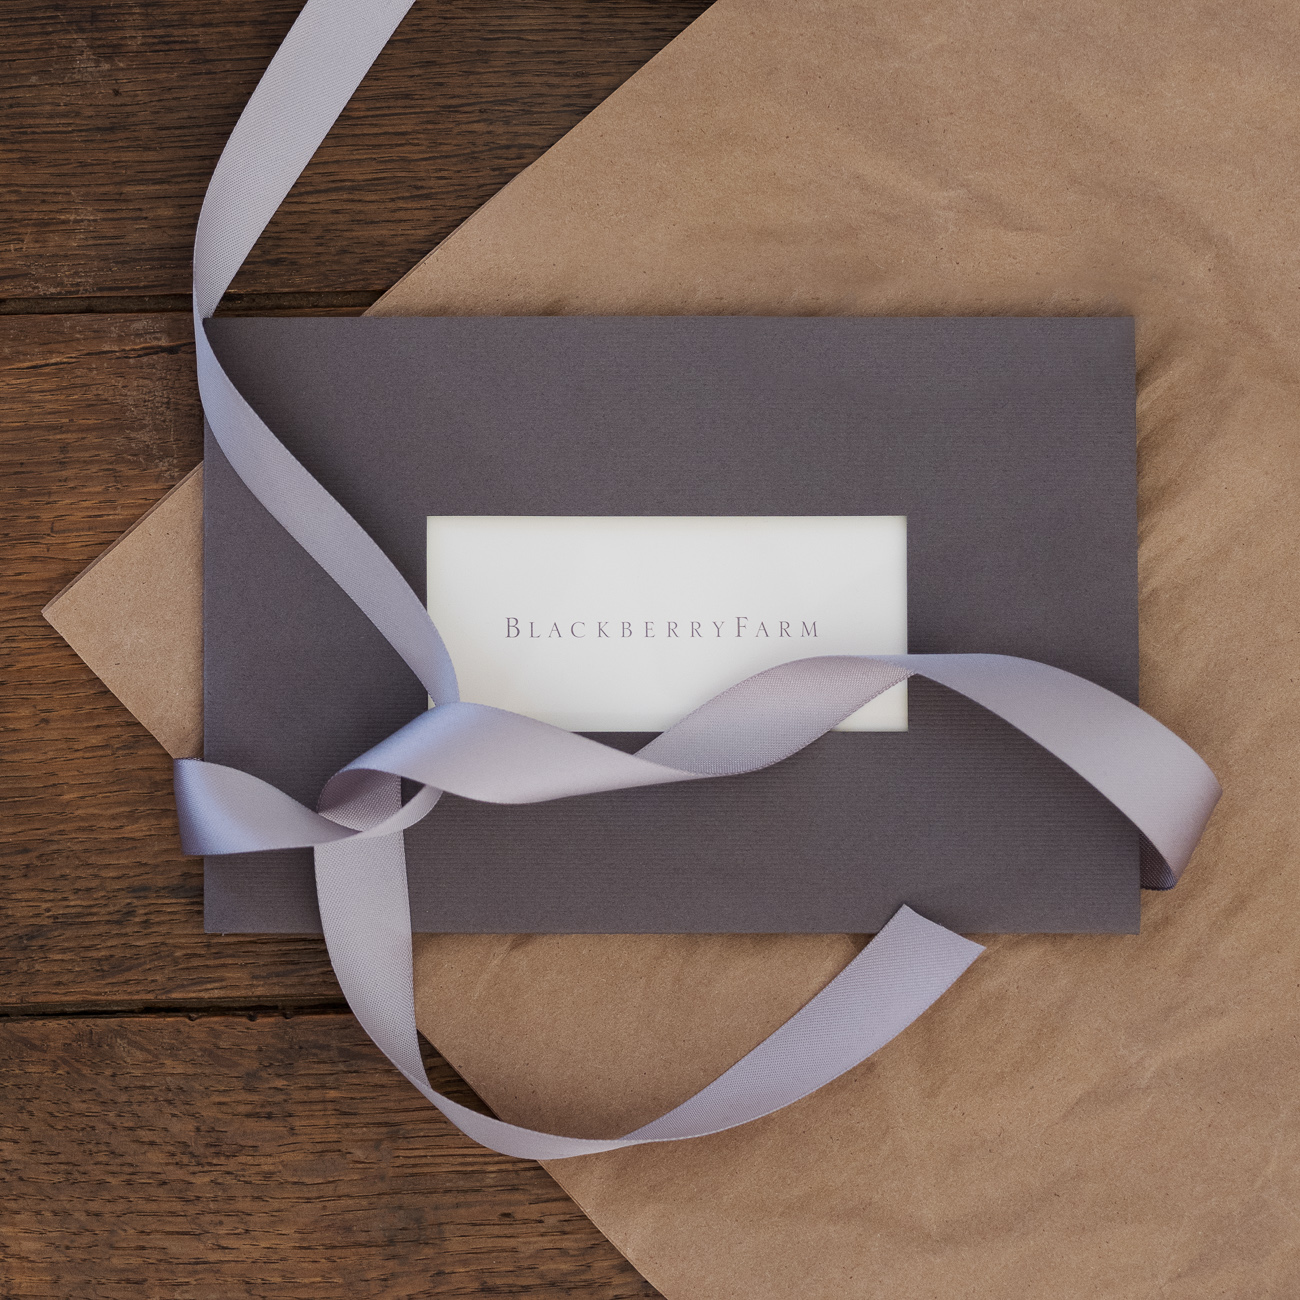 Gifts - Gift Certificates - Blackberry Farm